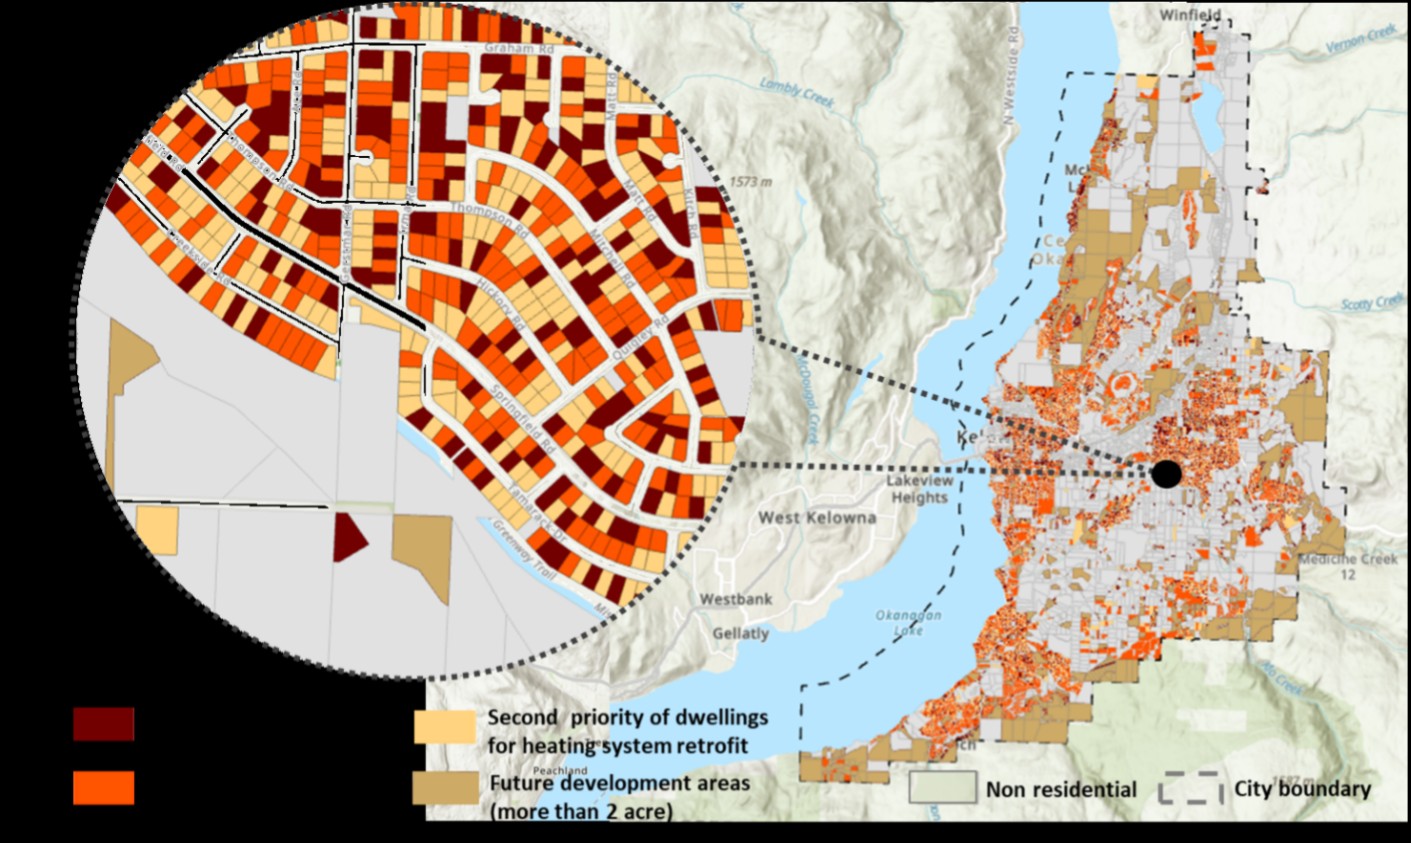 A magnified map area with spatial classification of buildings and priority of heating system retrofit